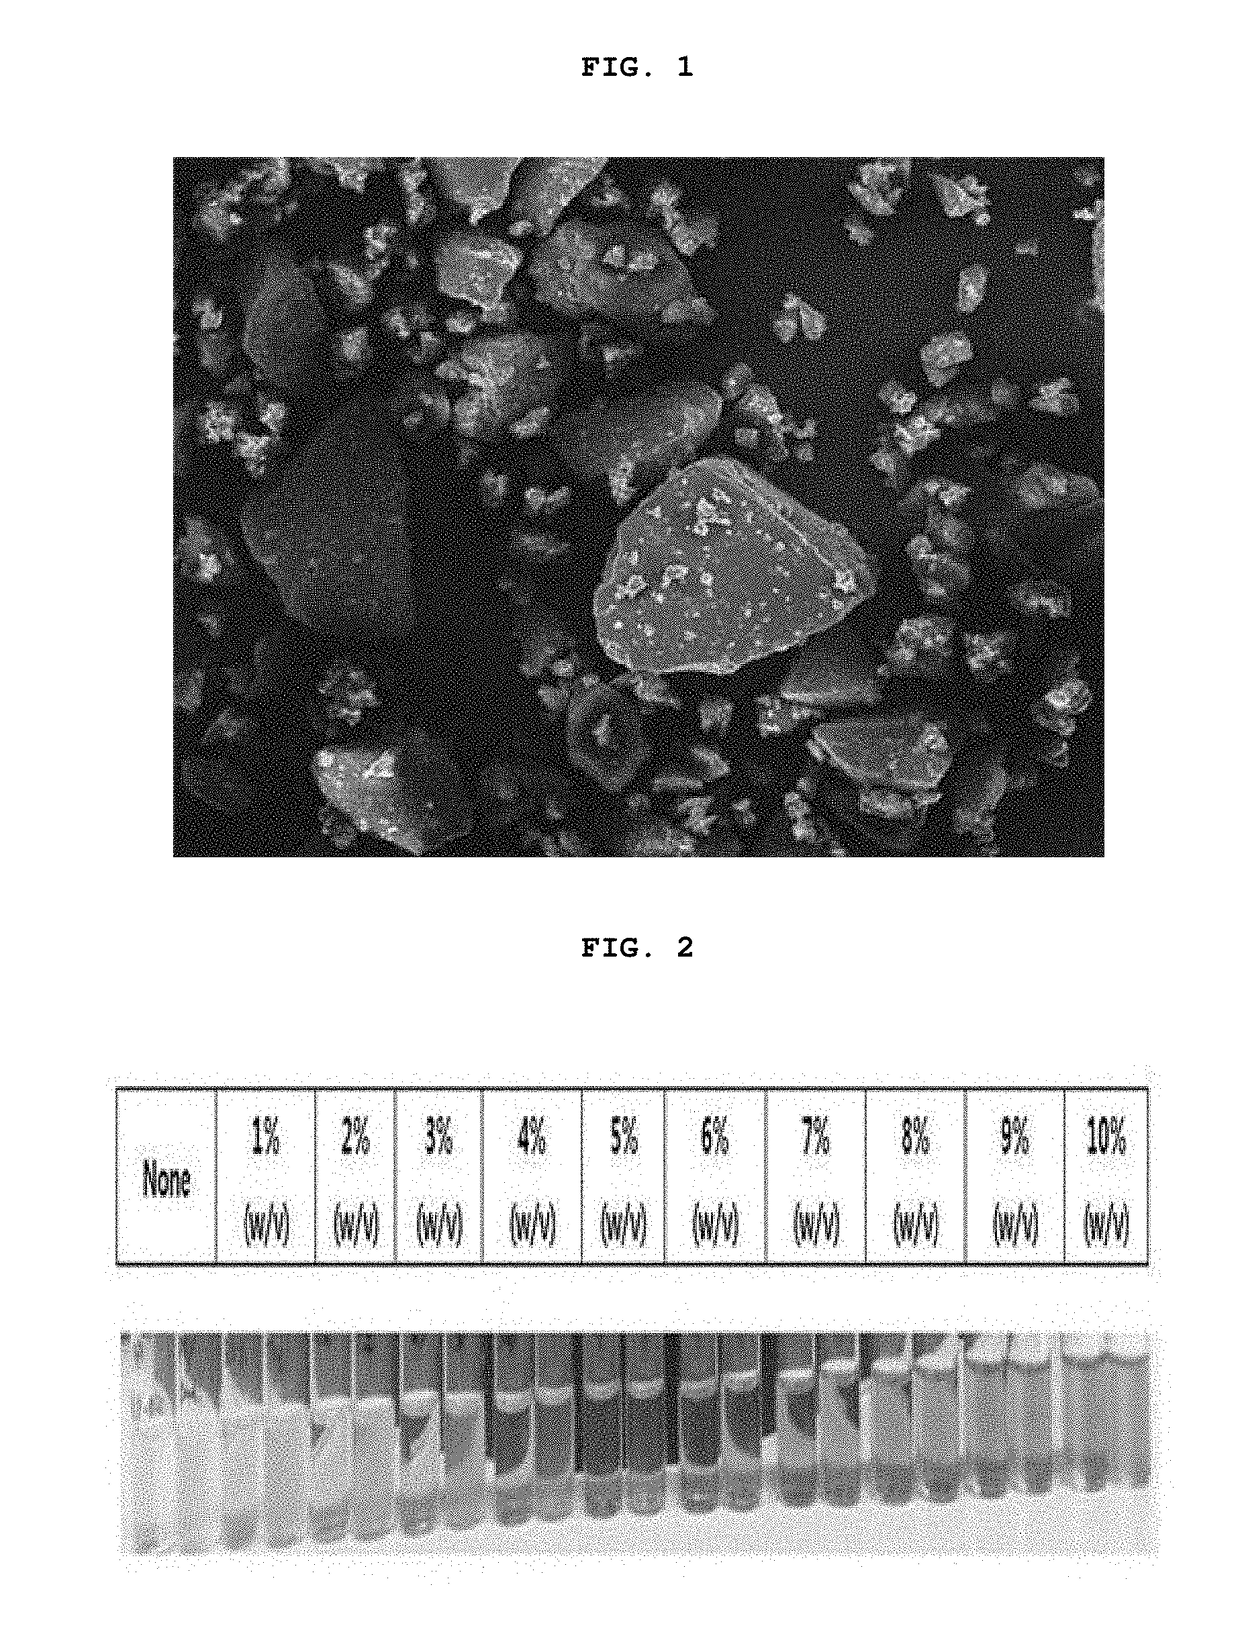 Functional hydrated hyaluronic acid and method for producing coated lactic acid bacteria having excellent intestinal mucoadhesive ability and selective antagonistic action using same